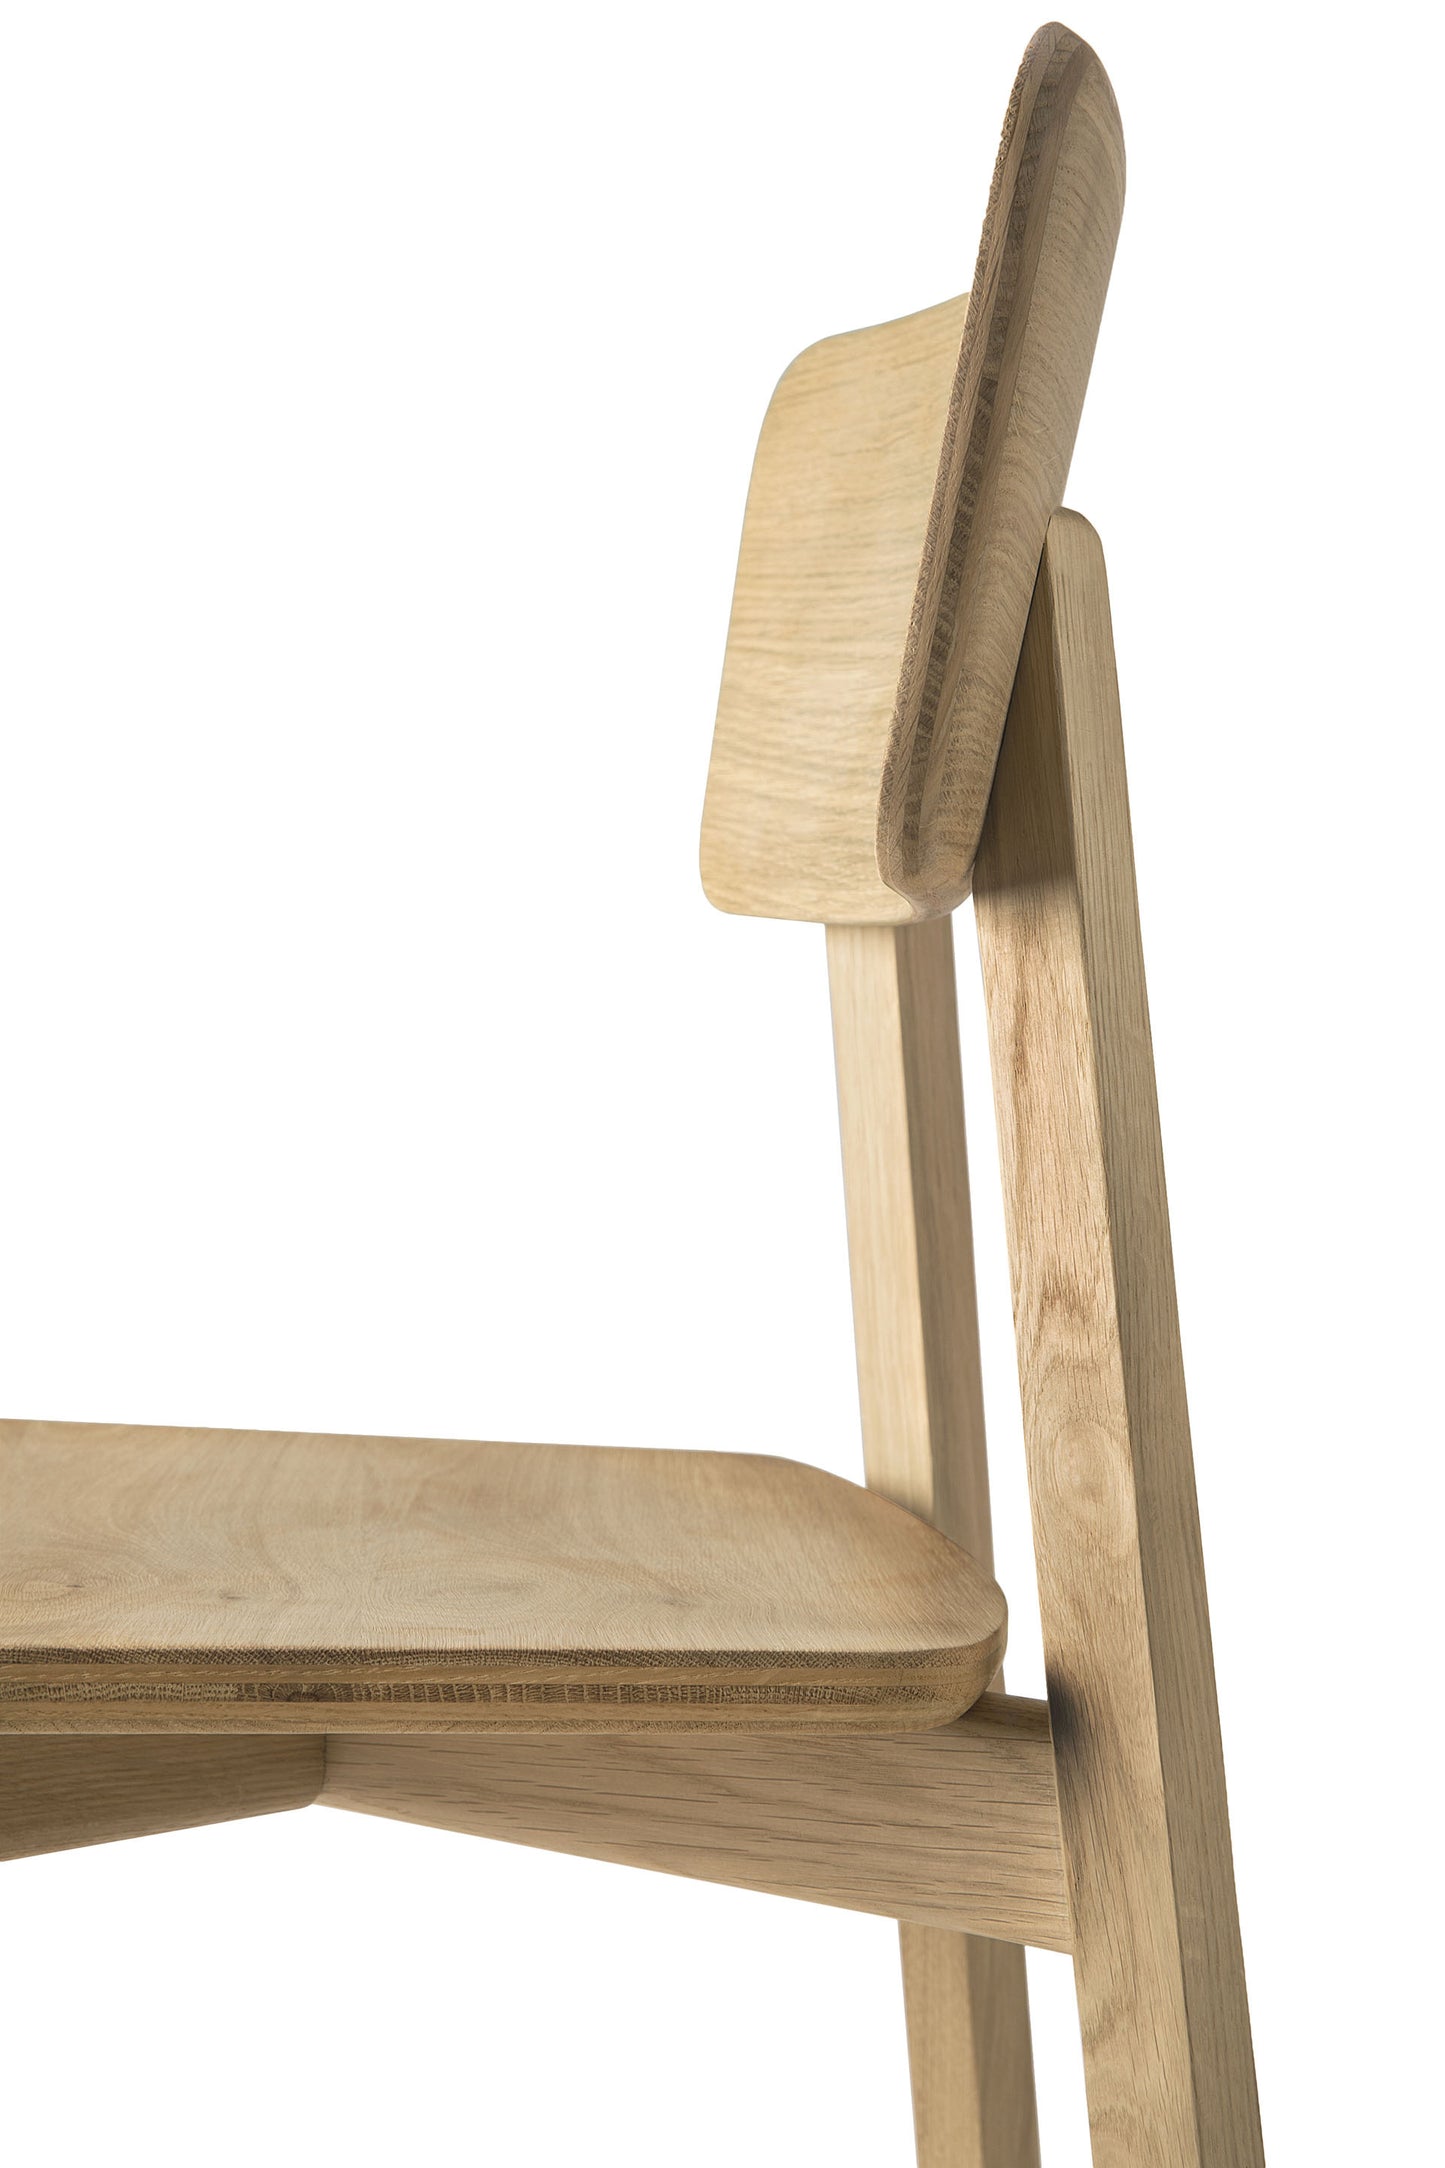 Ethnicraft Oak Casale Dining Chair is available from Make Your House A Home, Bendigo, Victoria, Australia